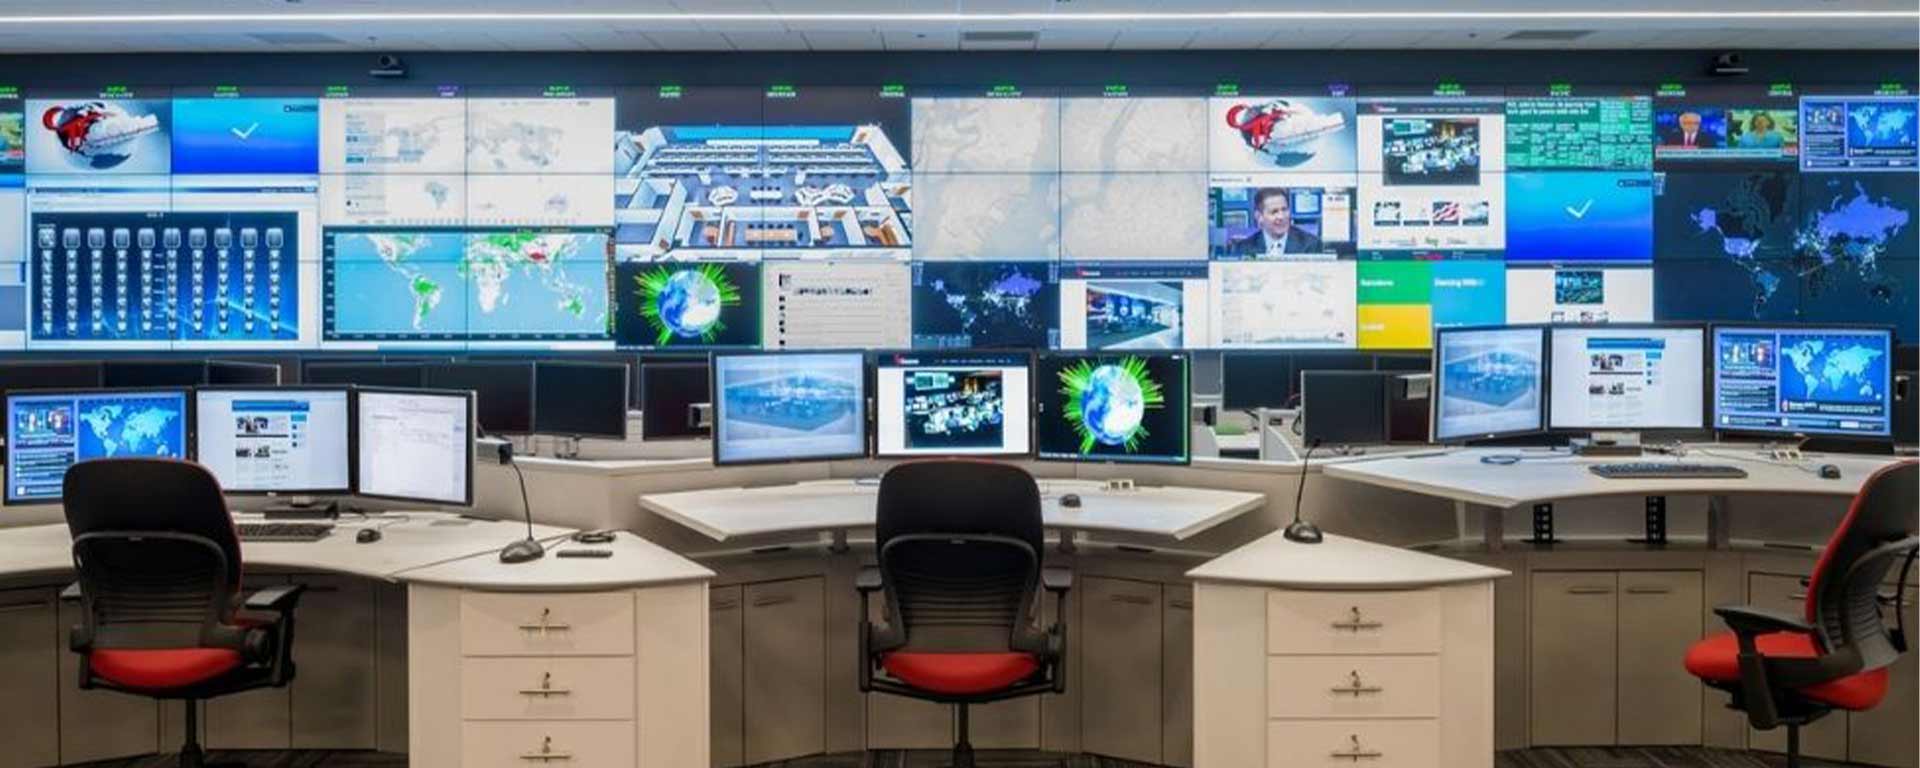 command center and control video walls in kenya